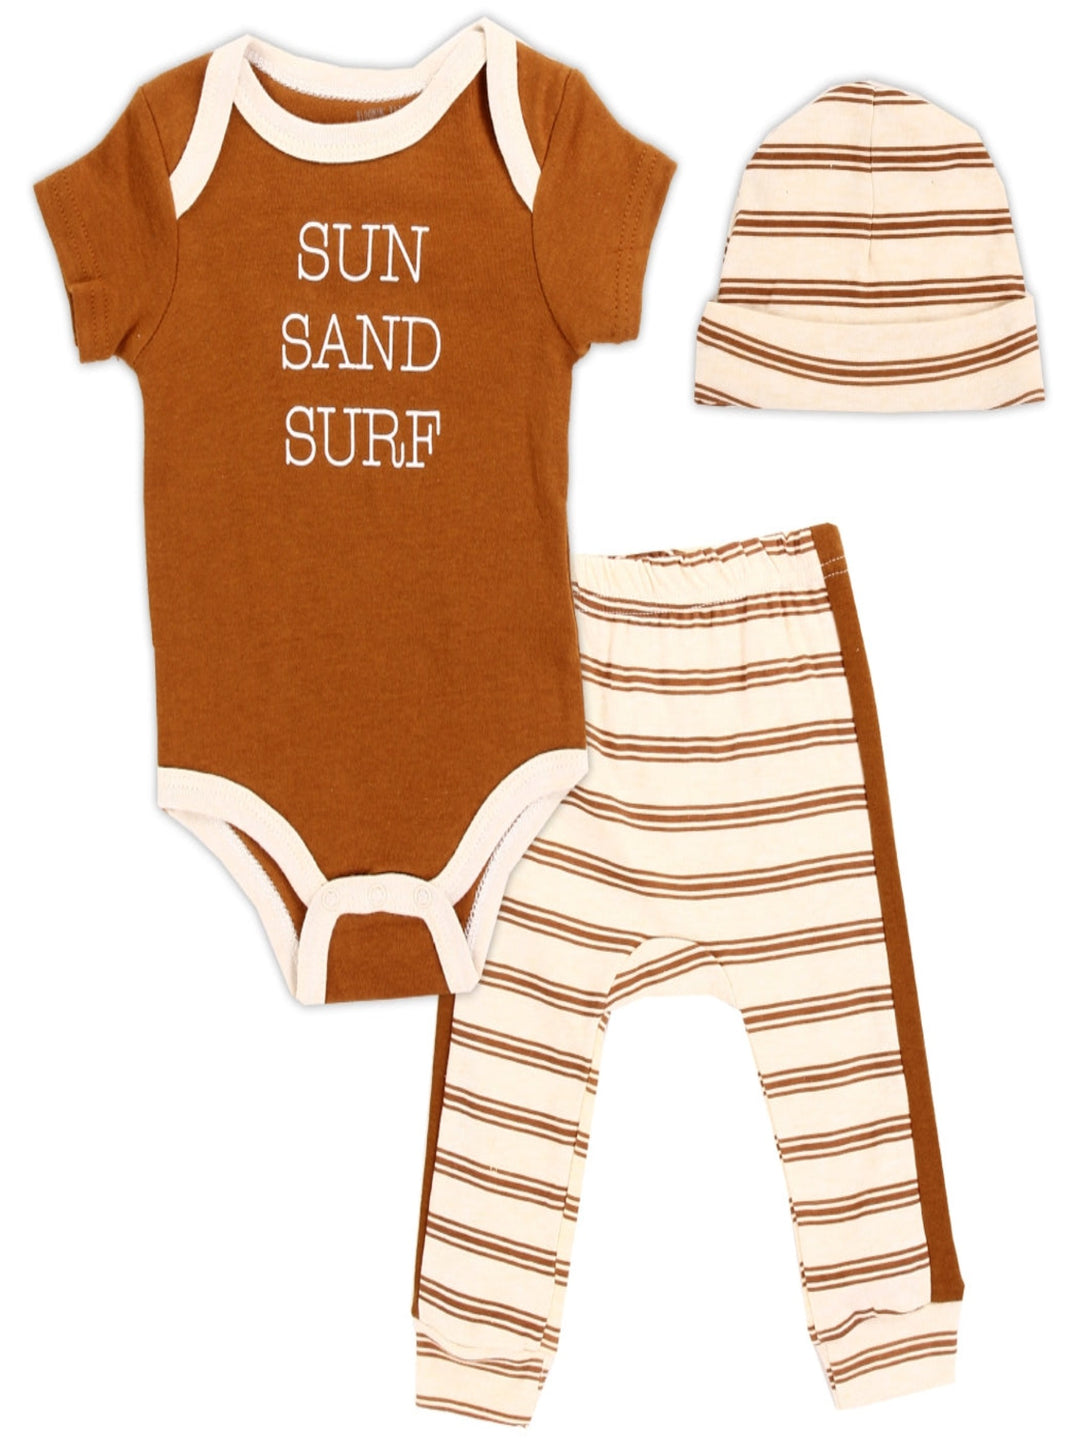 Sun, Sand and Surf 3 Piece Baby Outfit, Rust